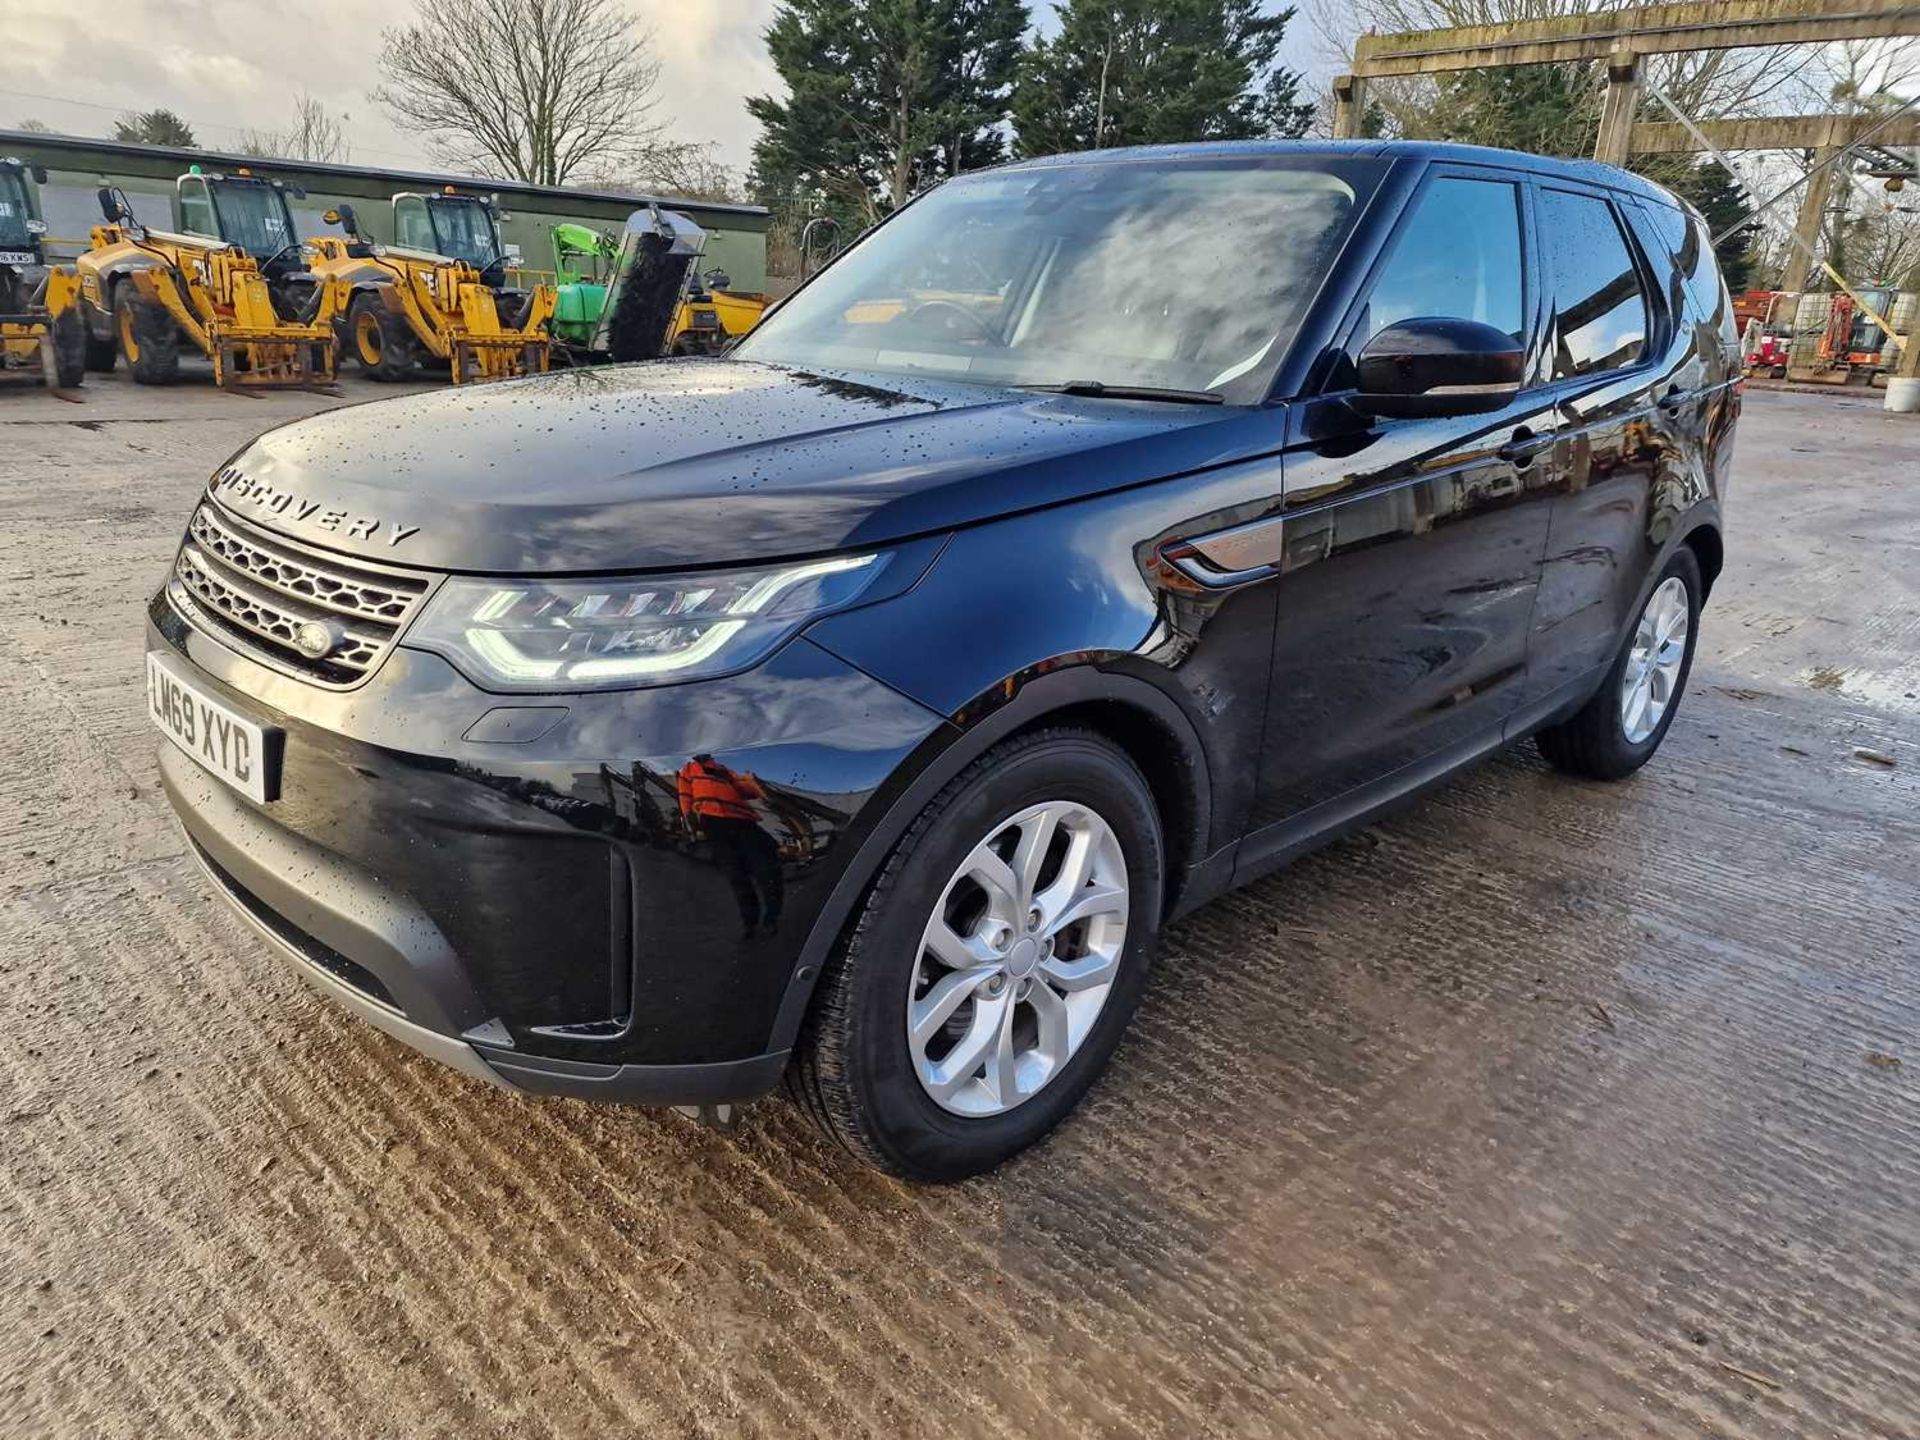 Landrover Discovery SD4 SE 240 Commercial, Auto, Paddle Shift, Sat Nav, Reverse Camera, Parking Sens - Image 27 of 52